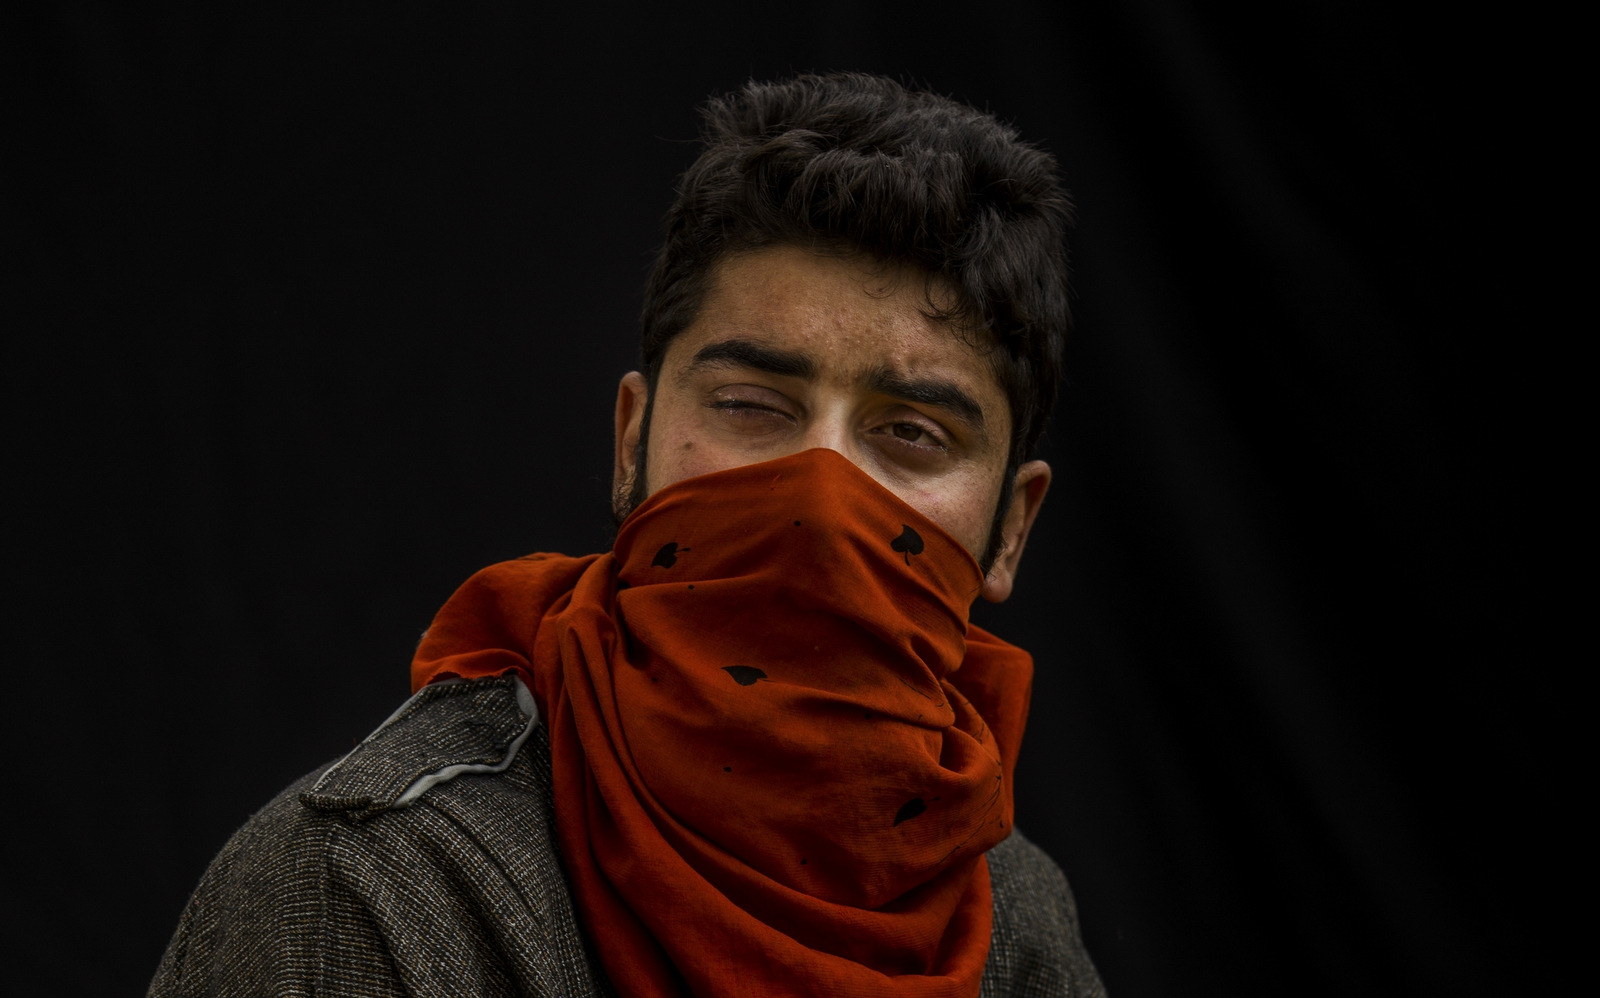 Tanveer poses for a portrait with his face partially covered, near Baramulla, Indian-controlled Kashmir. Tanveer lost eyesight on his right eye because metal pellet injuries. "I was an earning hand of my family. I feel like a living dead." he says. (AP Photo/Bernat Armangue)